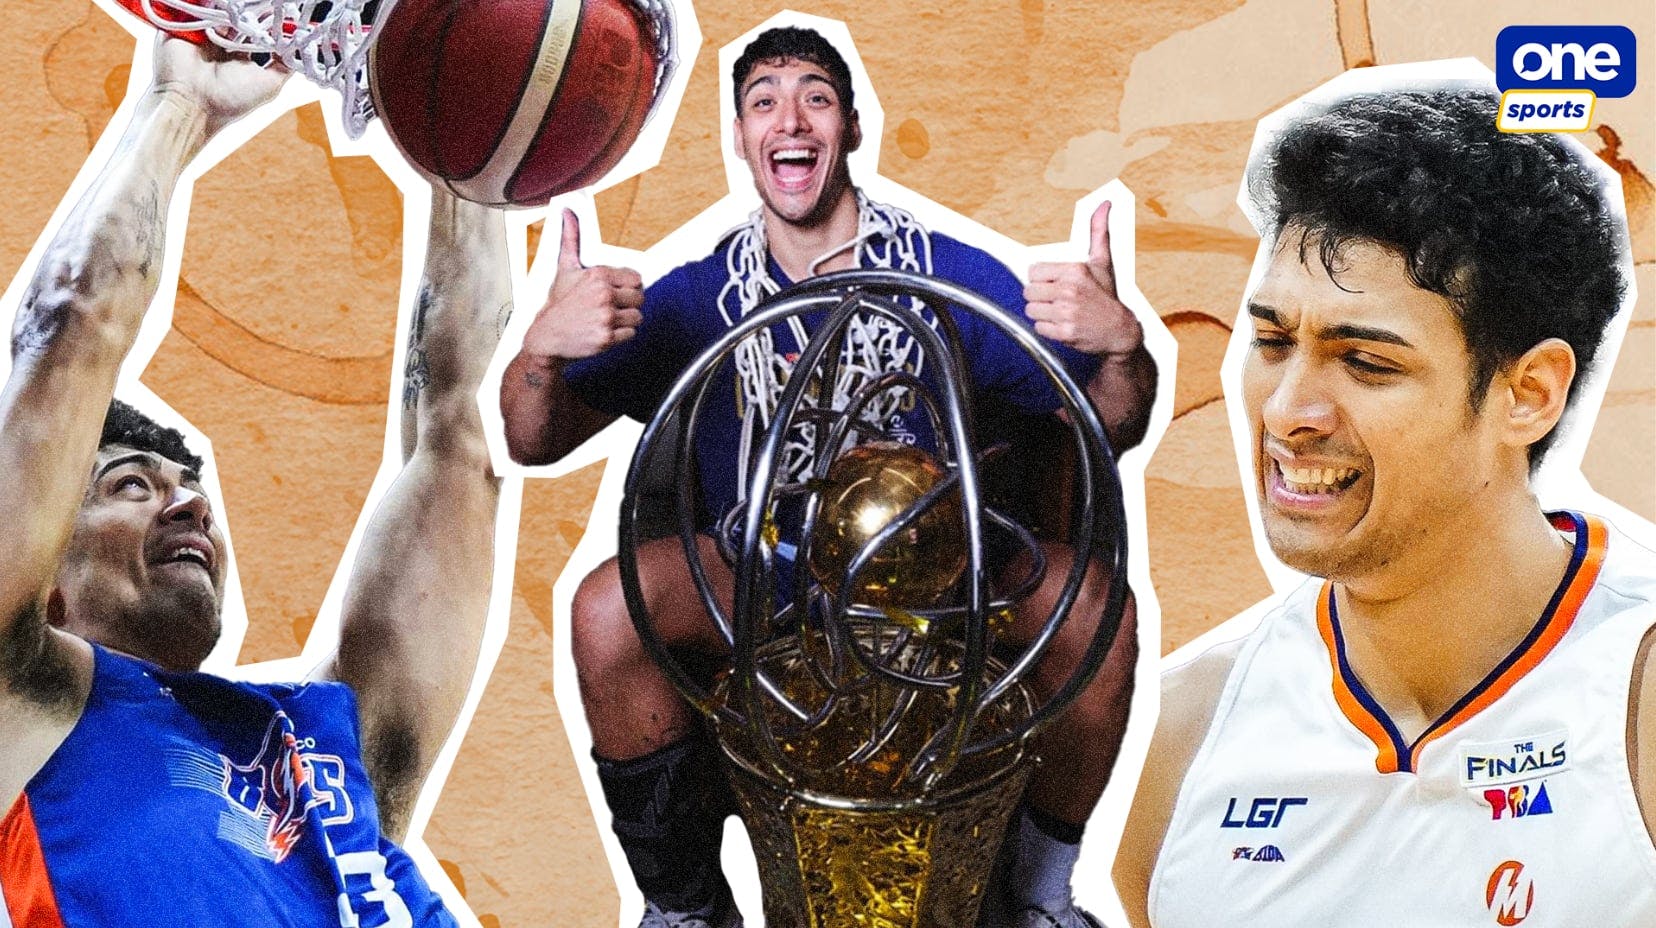 Grinding it out: How coffee fueled PBA champion Brandon Bates